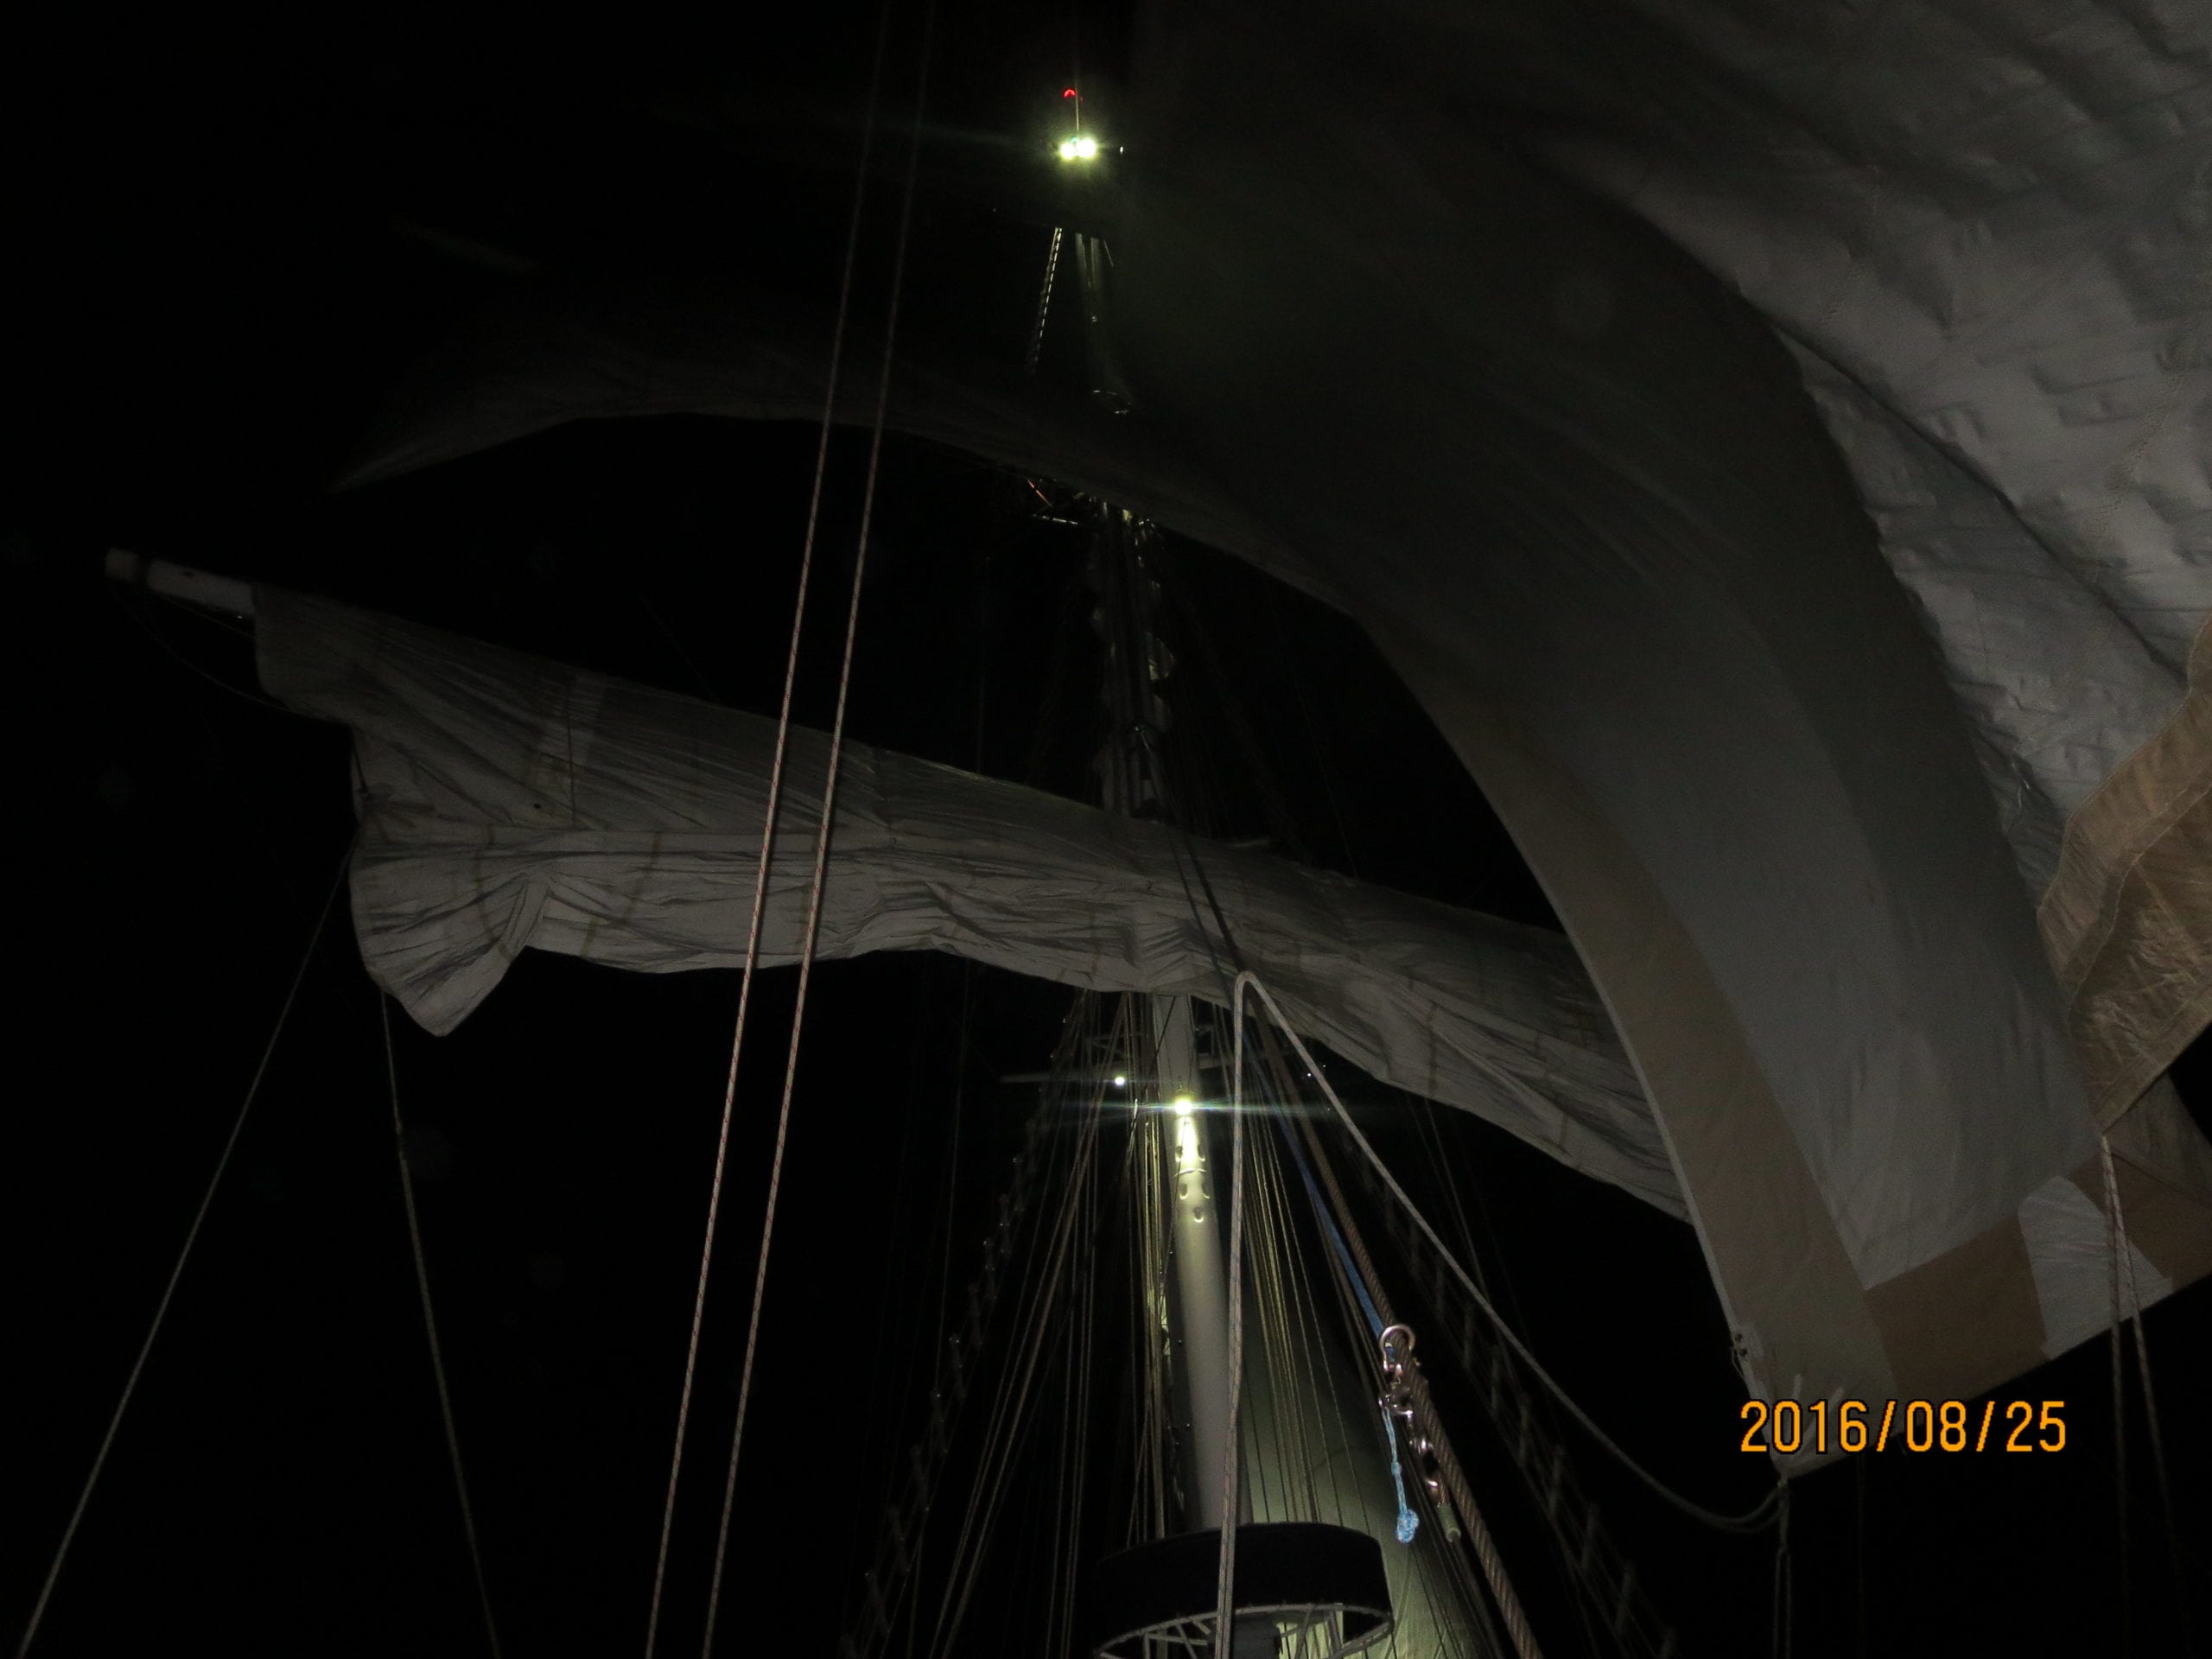 Sailing at night was also a new experience for Issy.